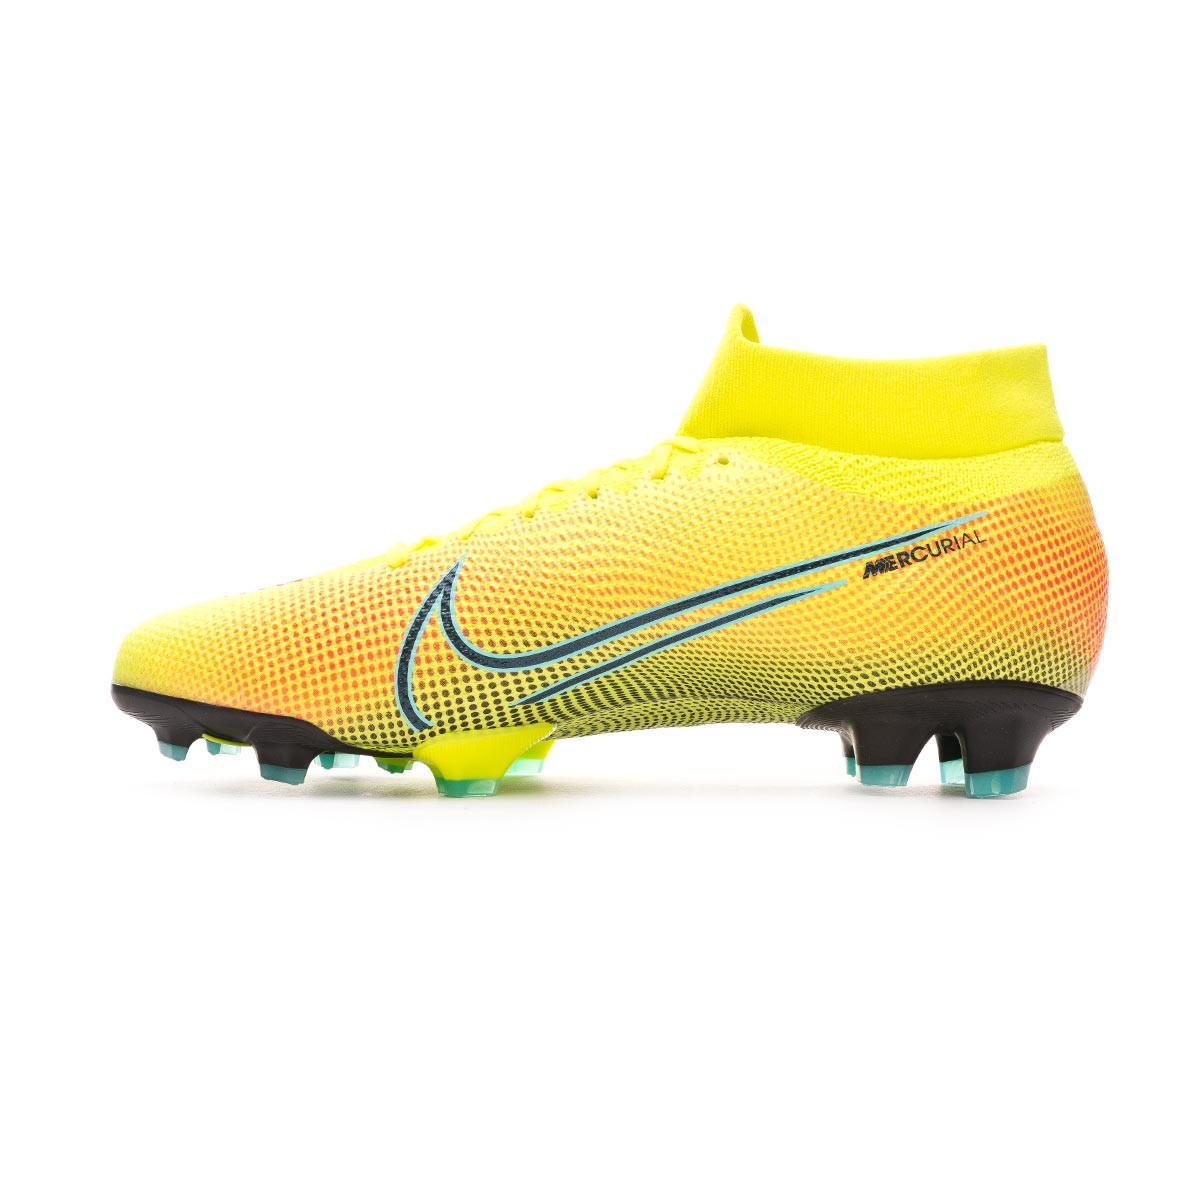 nike mercurial superfly 7 pro mds